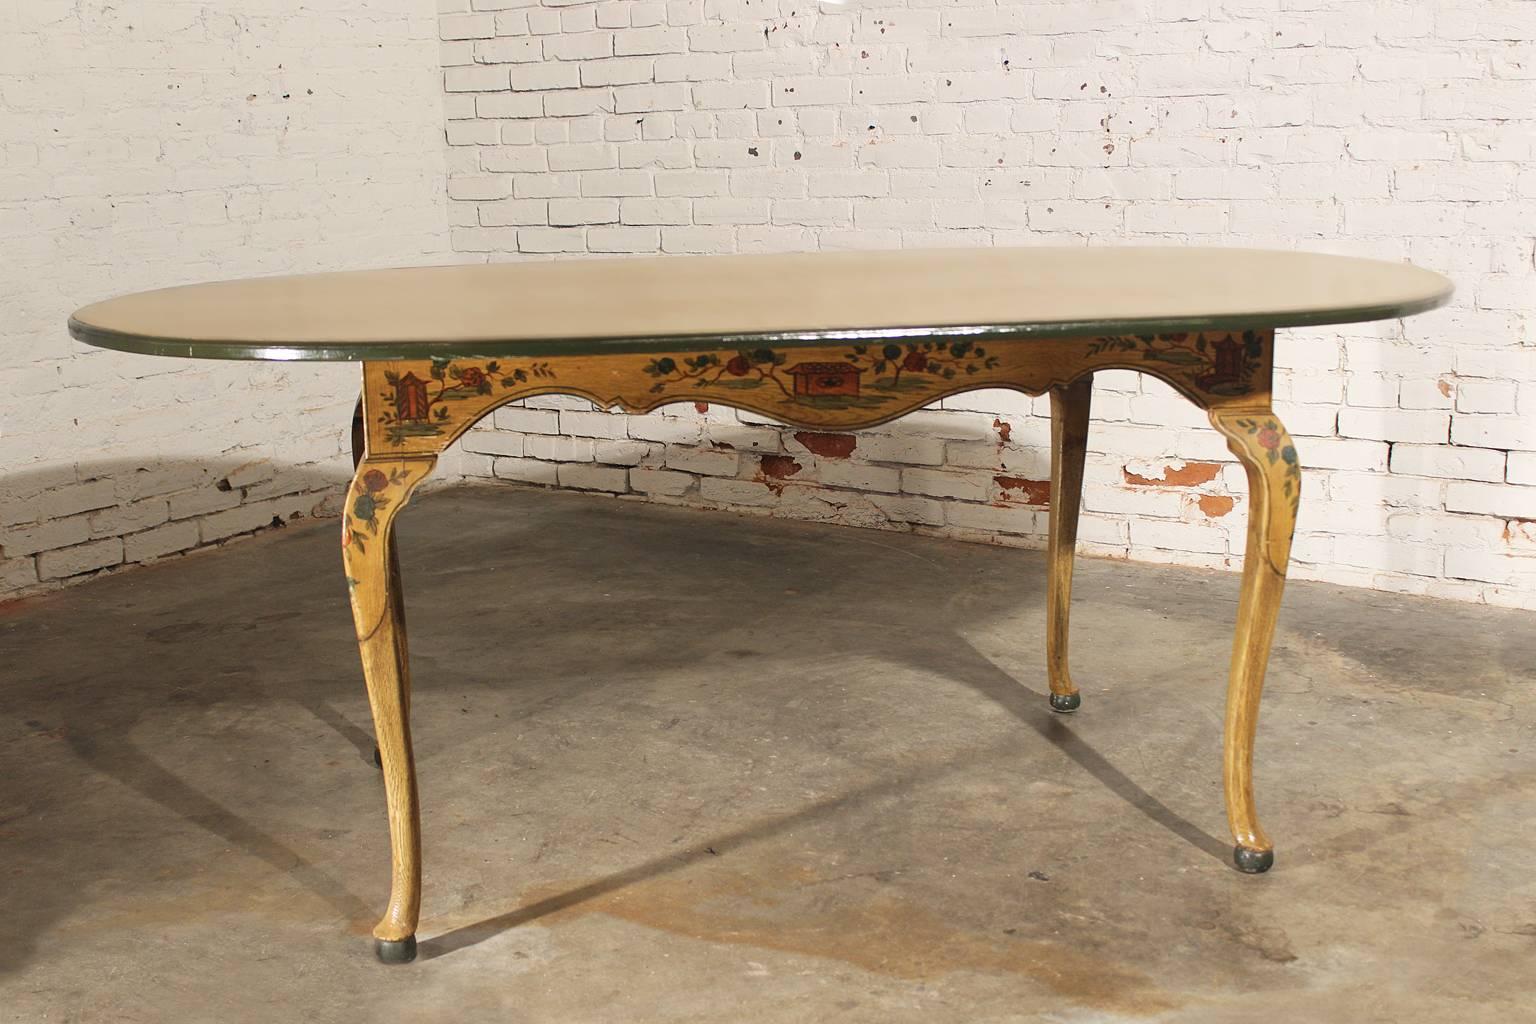 Wood Antique Chinoiserie Hand-Painted Oval Dining Table with Cabriole Legs